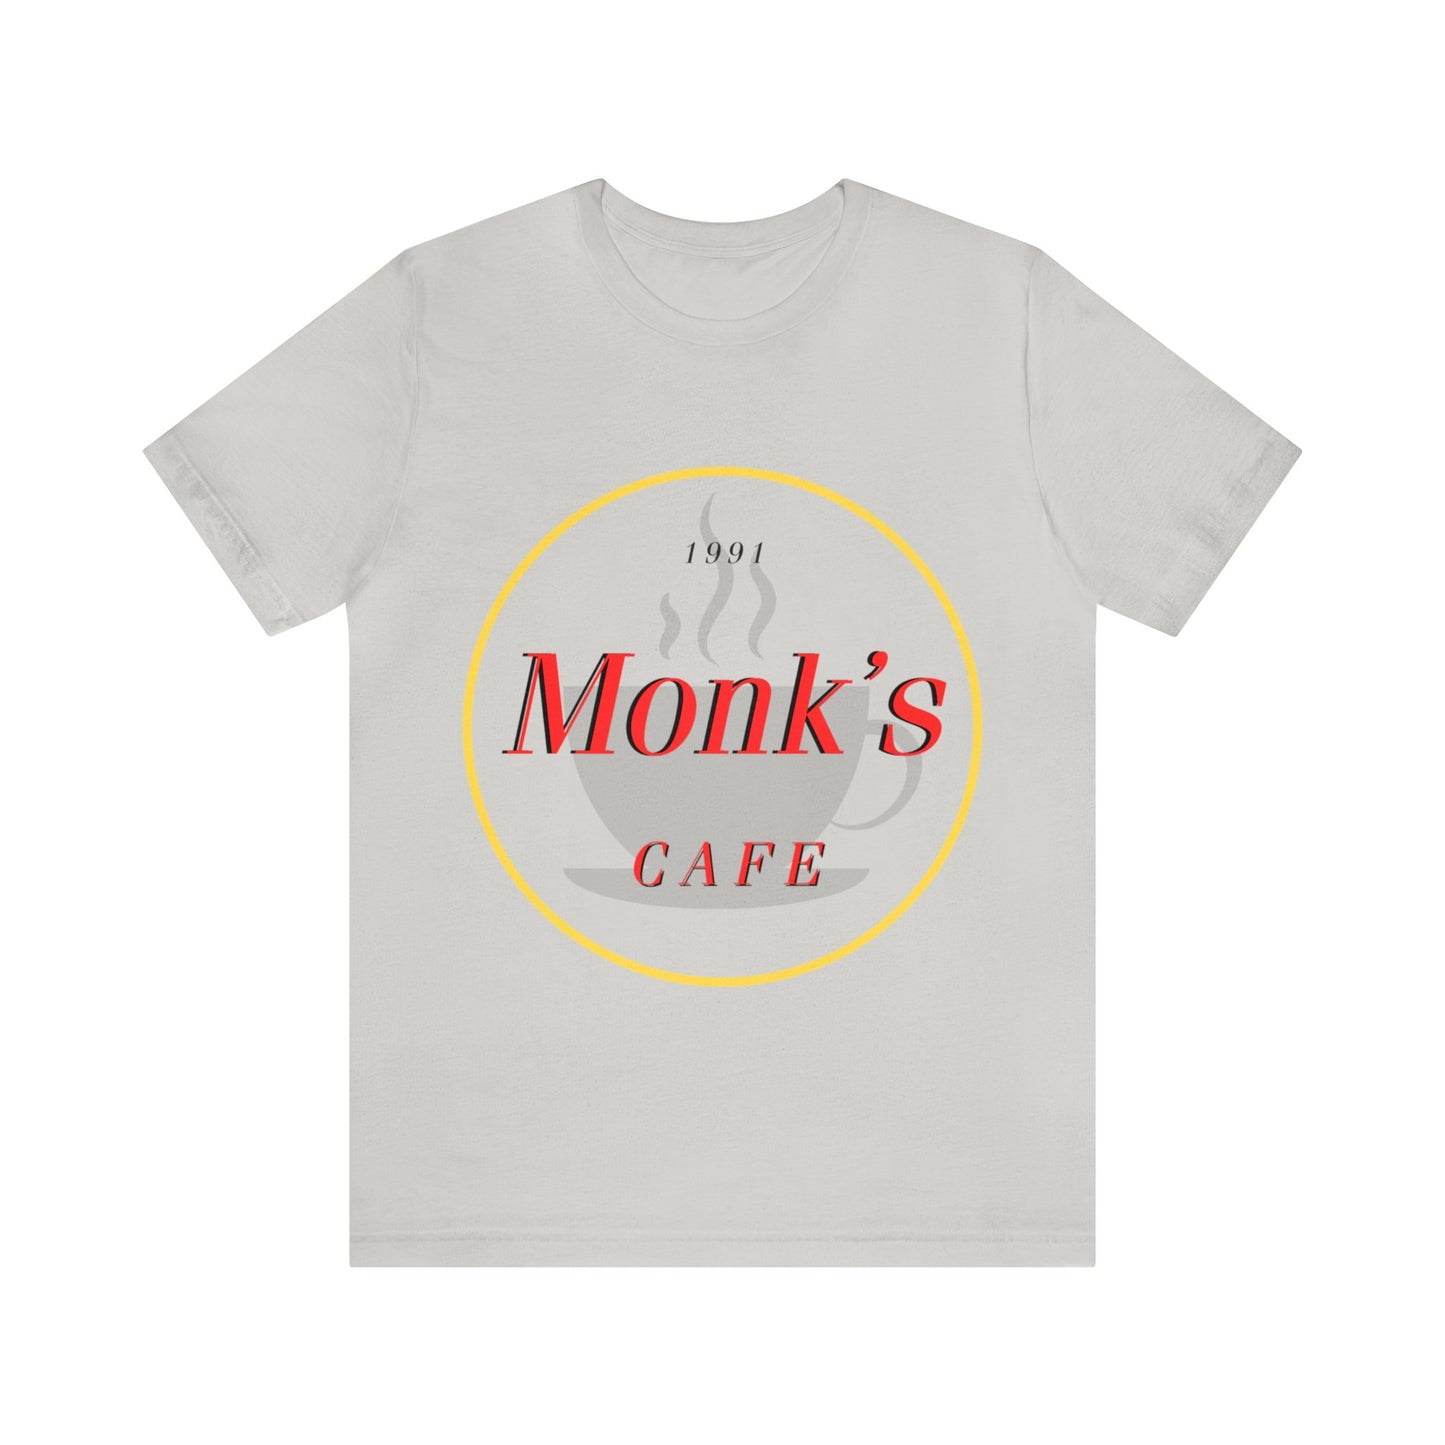 MONK'S CAFE